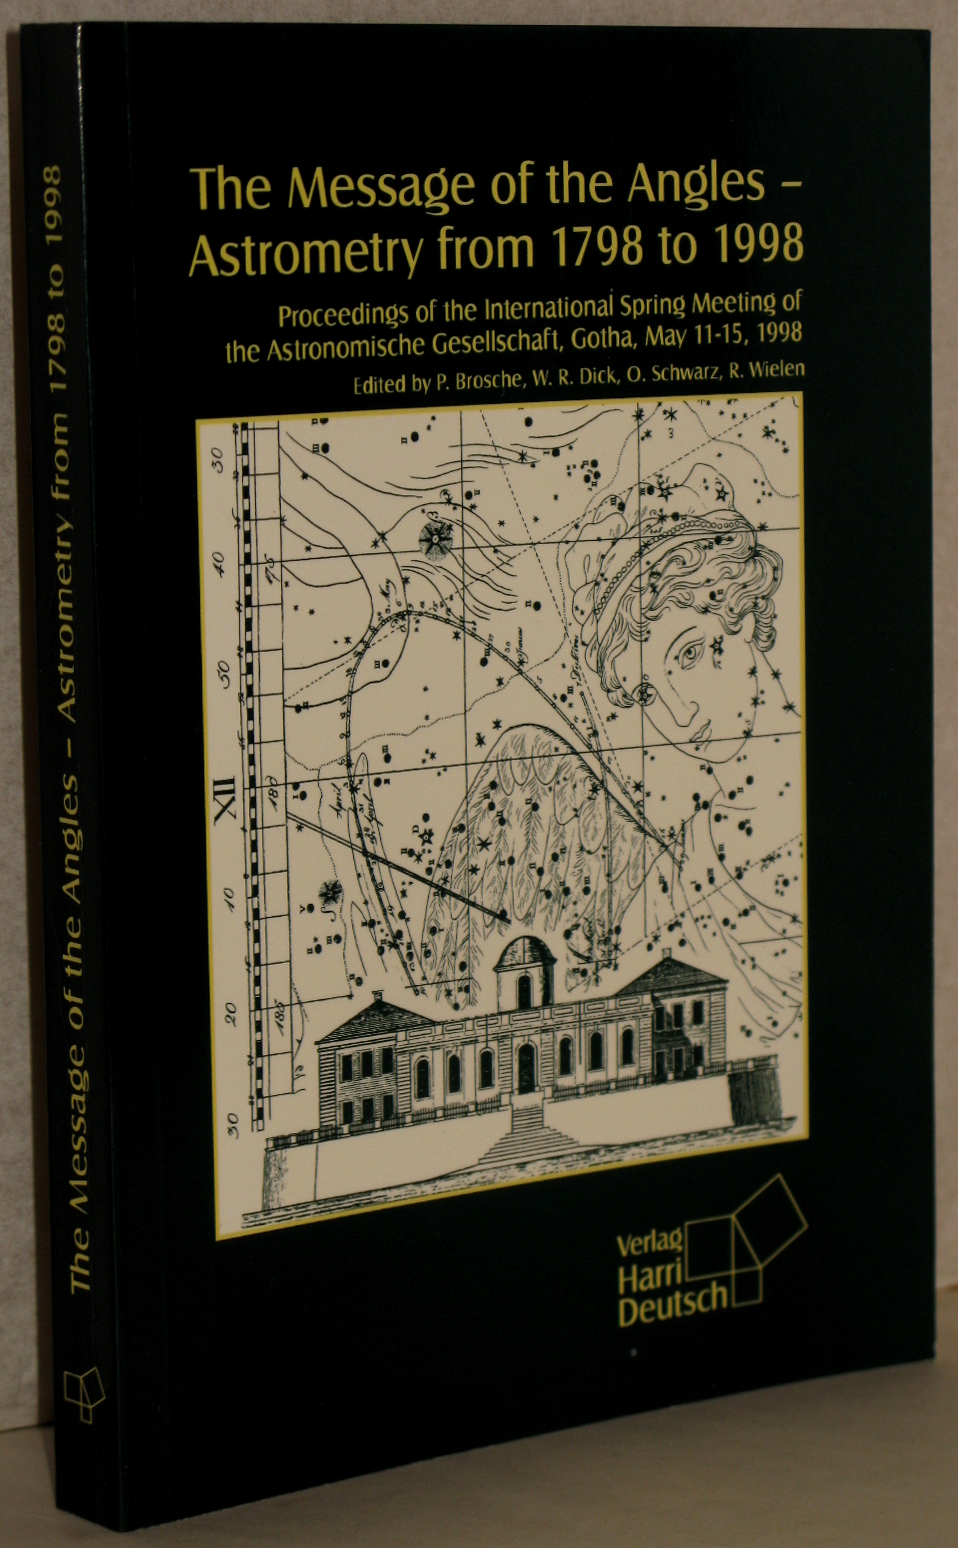 The Message of the Angles - Astrometry from 1798 to 1998. Proceedings of the international Spring Meeting of the Astronomische Gesellschaft, Gotha, May 11-15, 1998, commemorating at the Seeberg observatory 200 years ago. - Brosche, Peter u. Wolfgang R. Dick, Oliver Schwarz, Roland Wielen (Ed.)